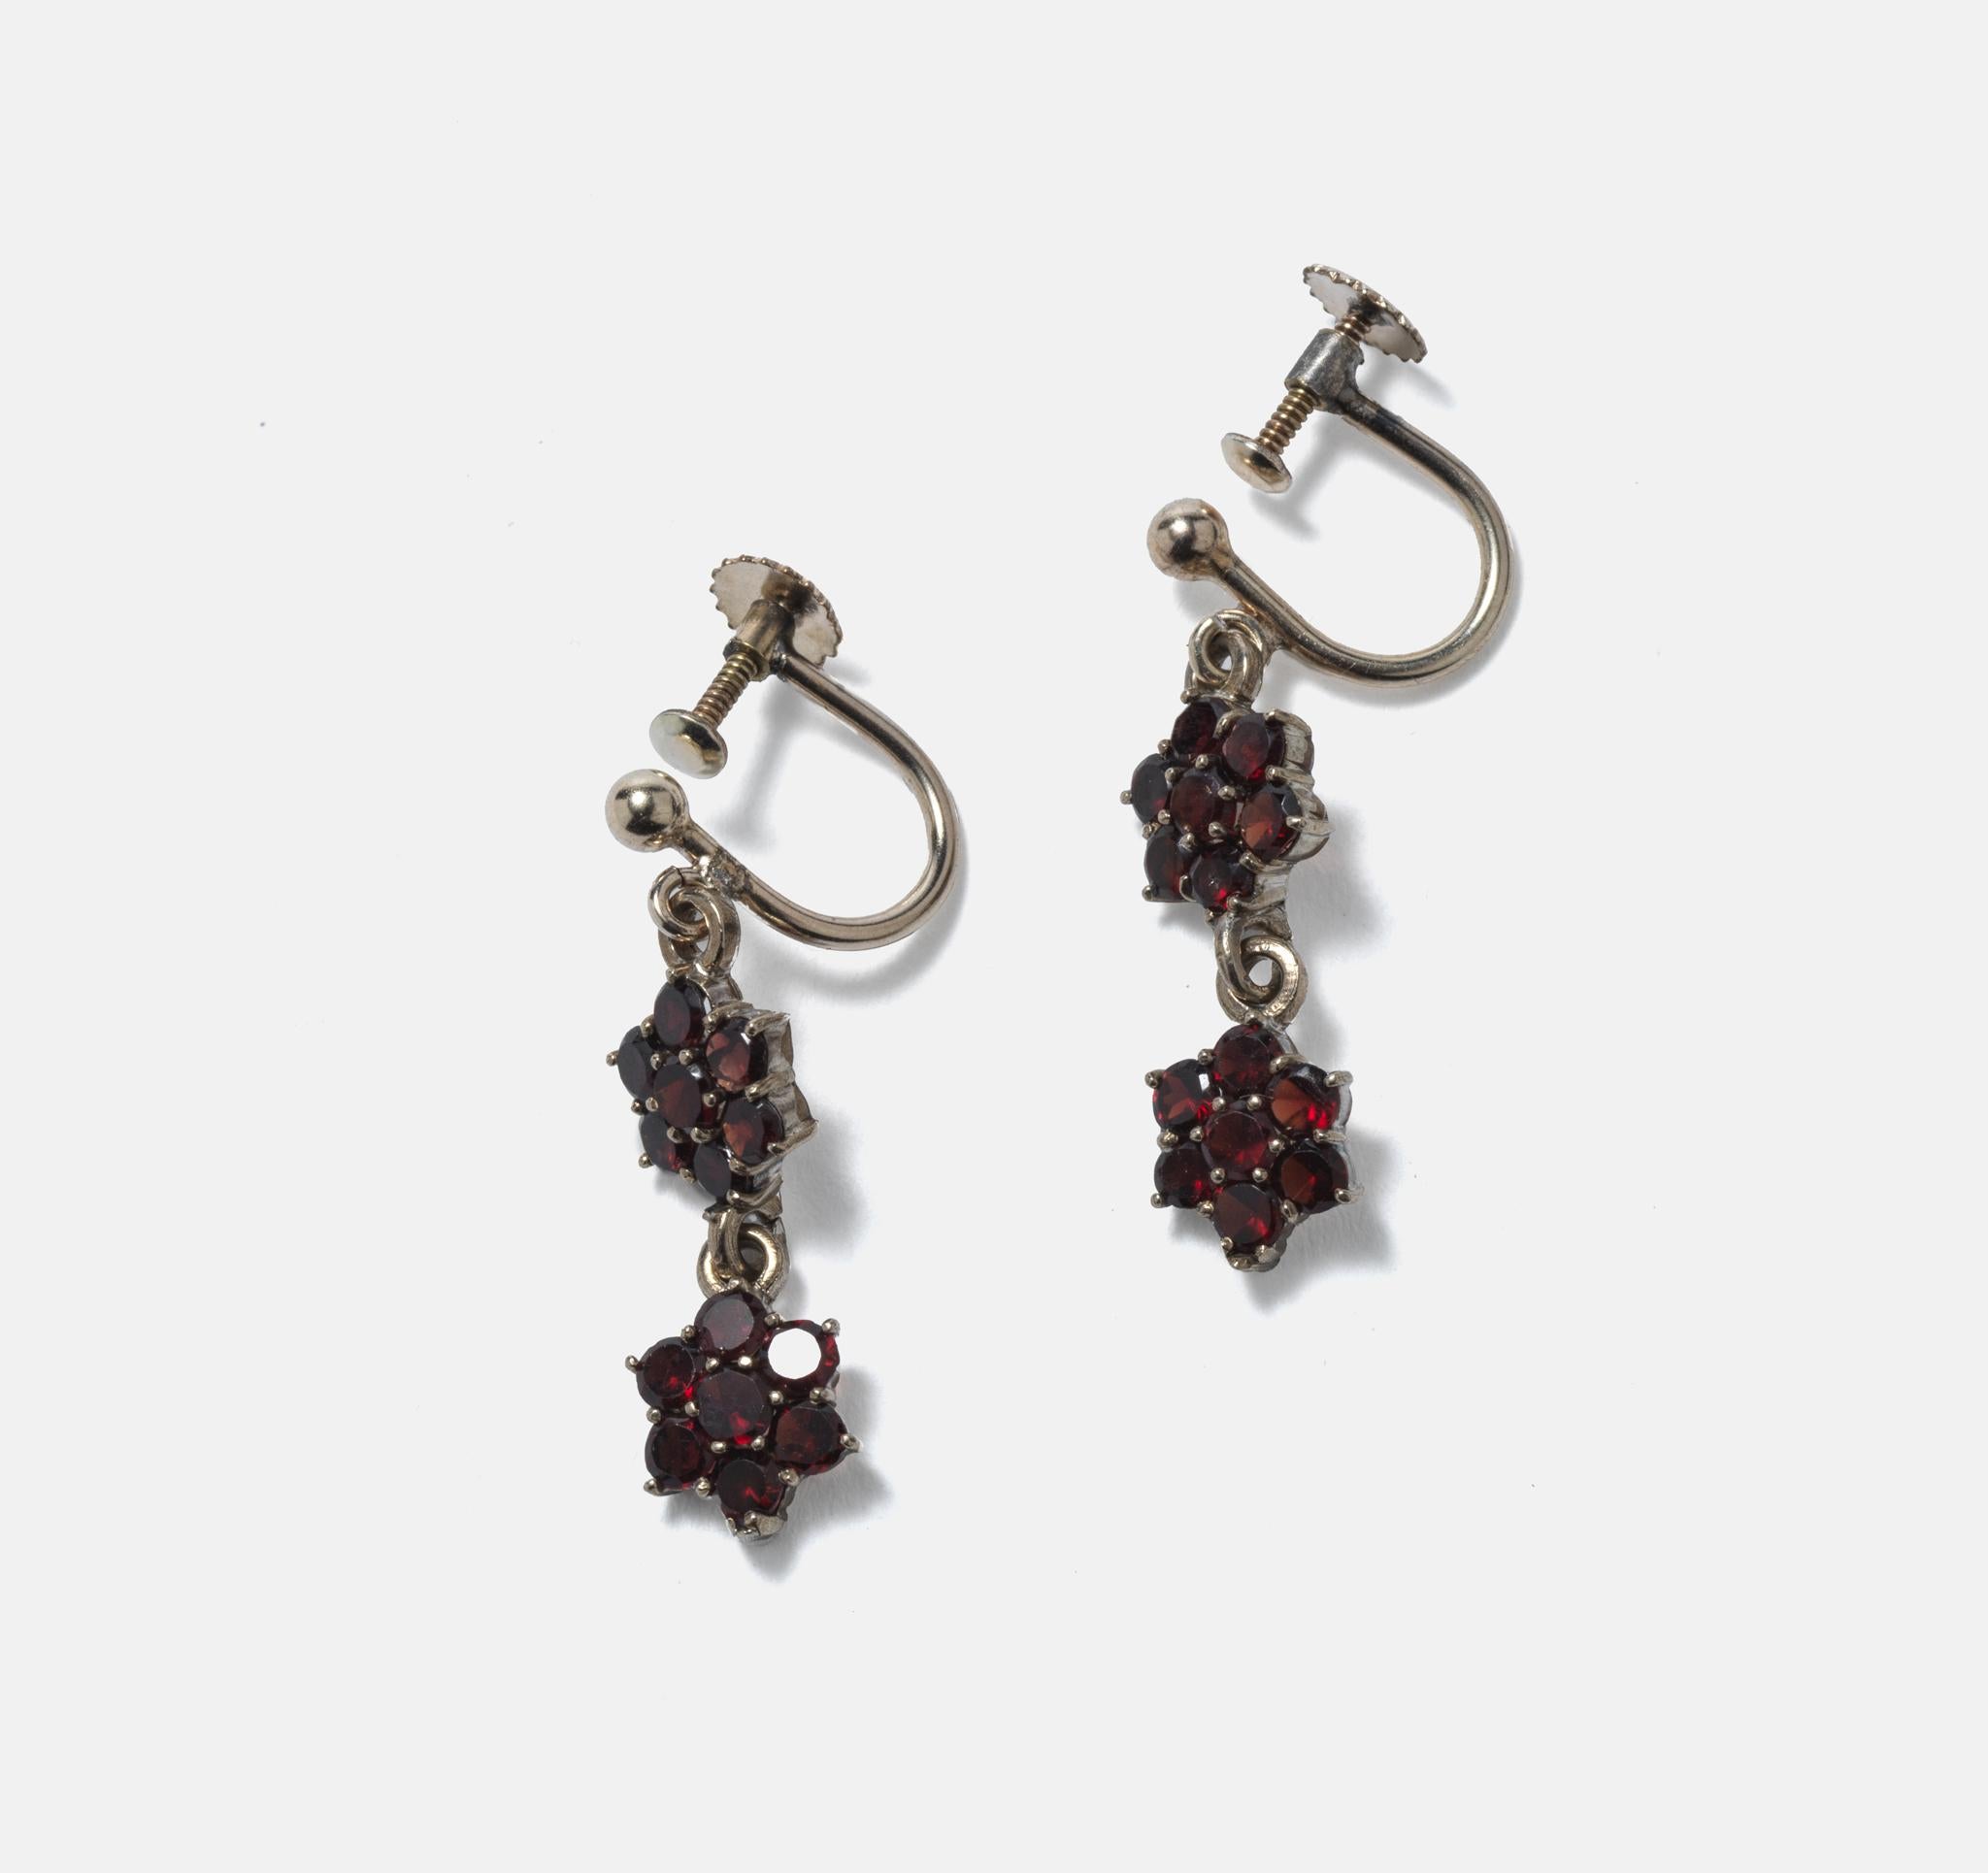 A sweet pair of small earrings made of silver with set garnets in the shape of flowers. Garnets were very popular in the 19th c and early 20th c. The deep red colour works very well with the silver they are set in.